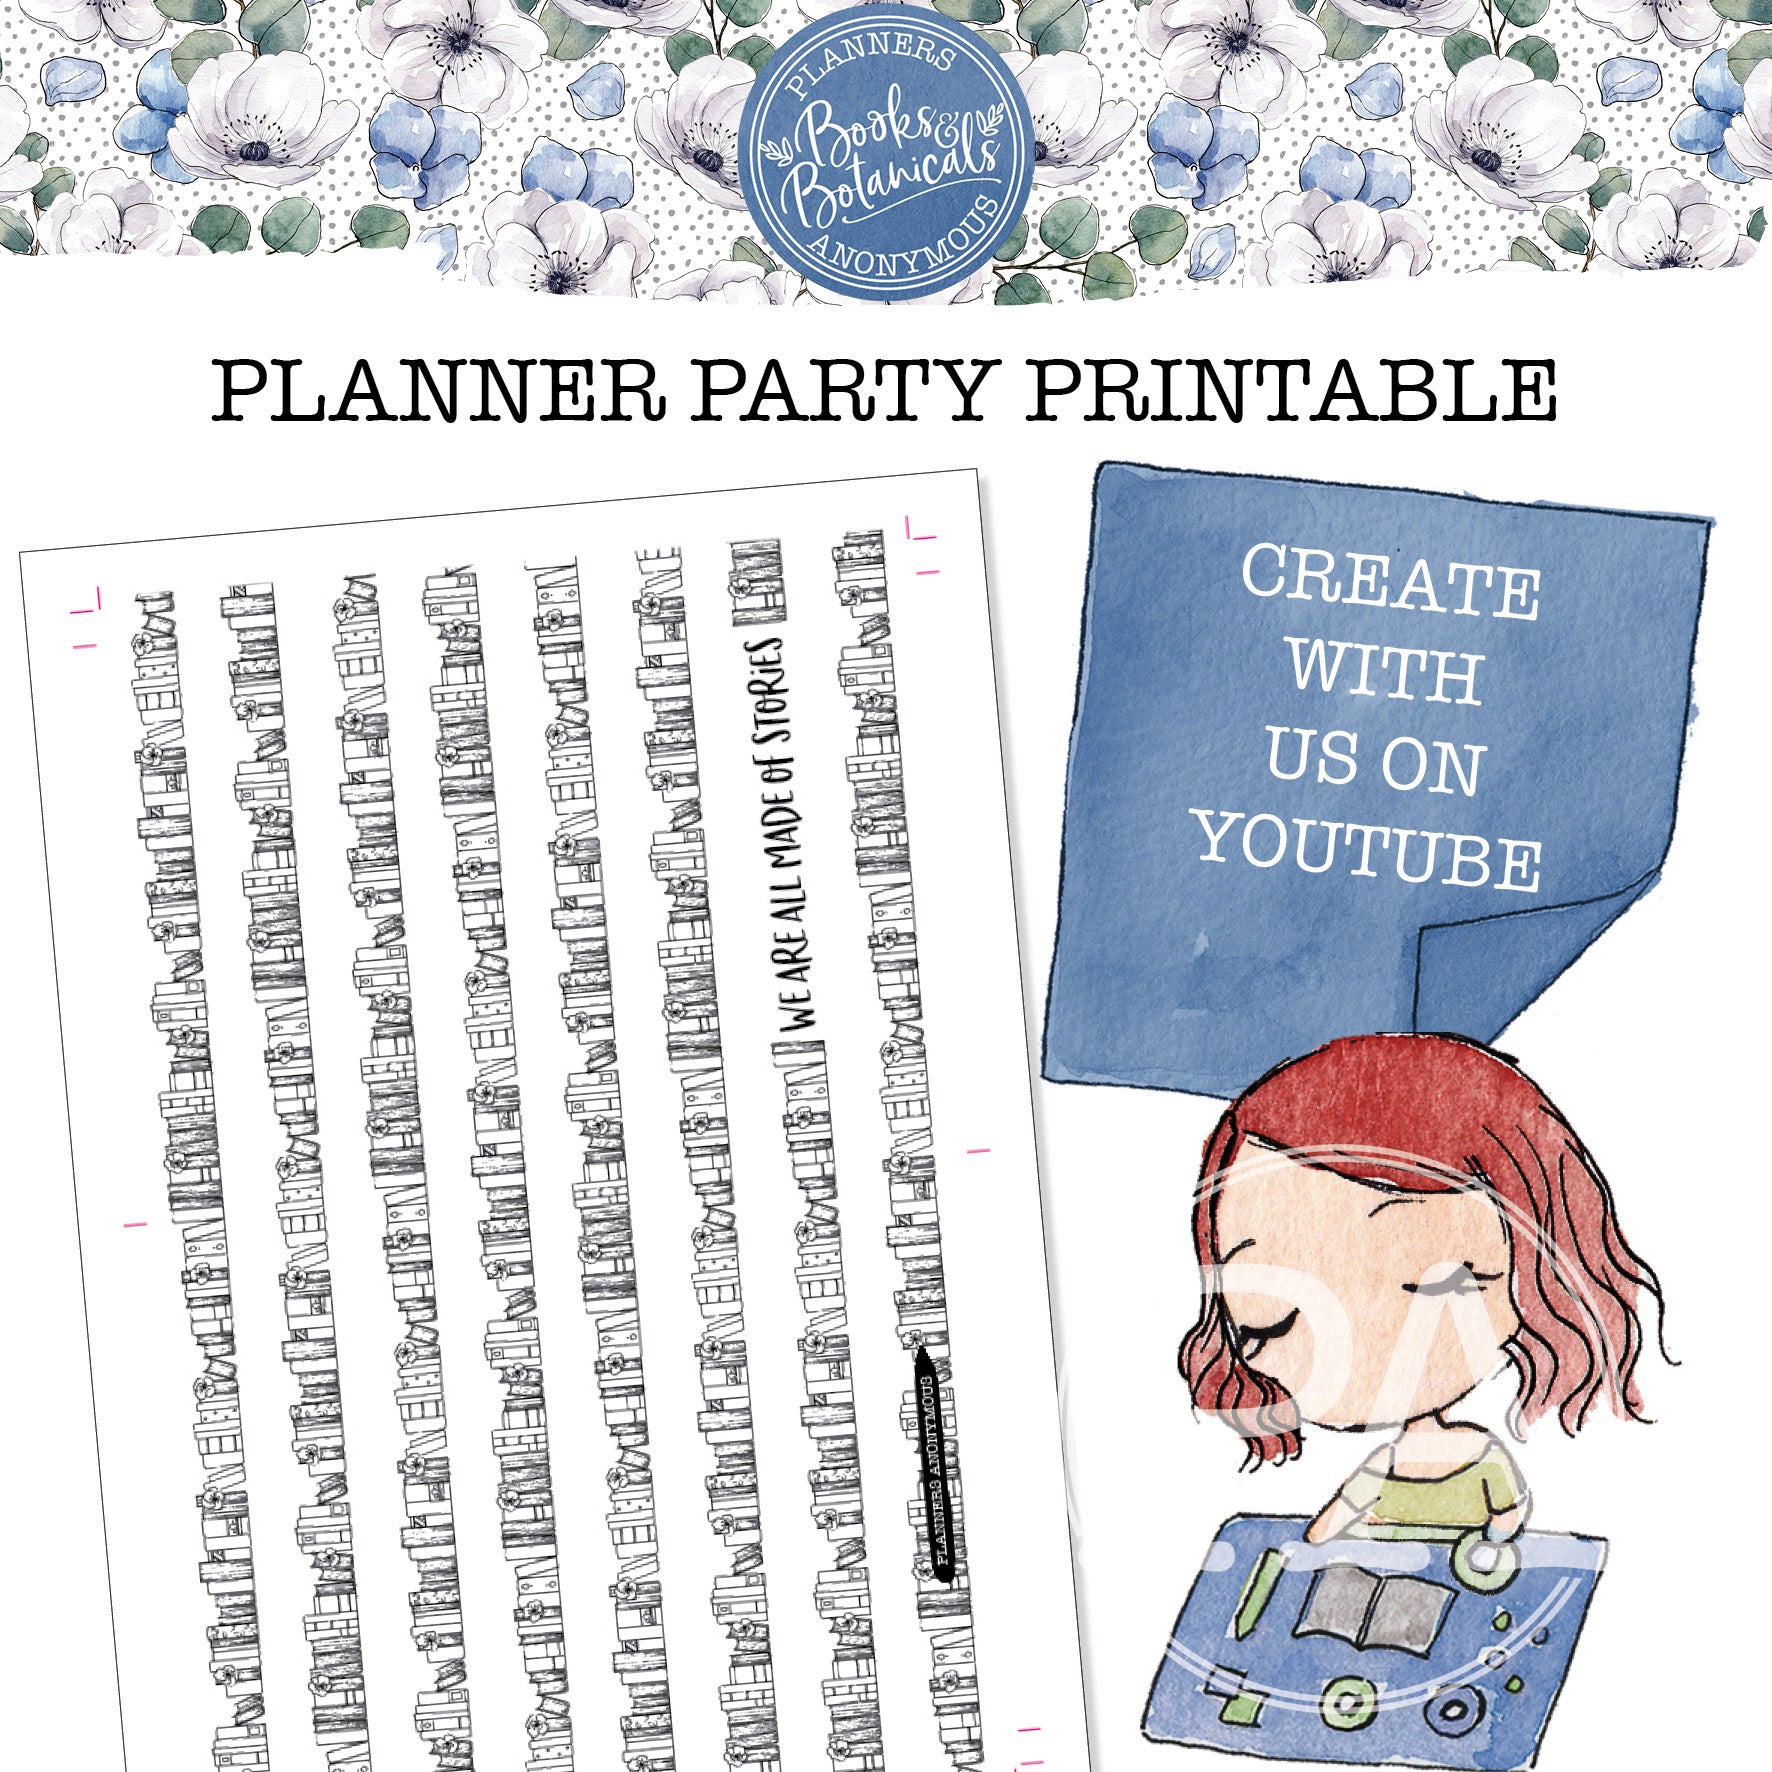 Books and Botanicals Planner Party Printable